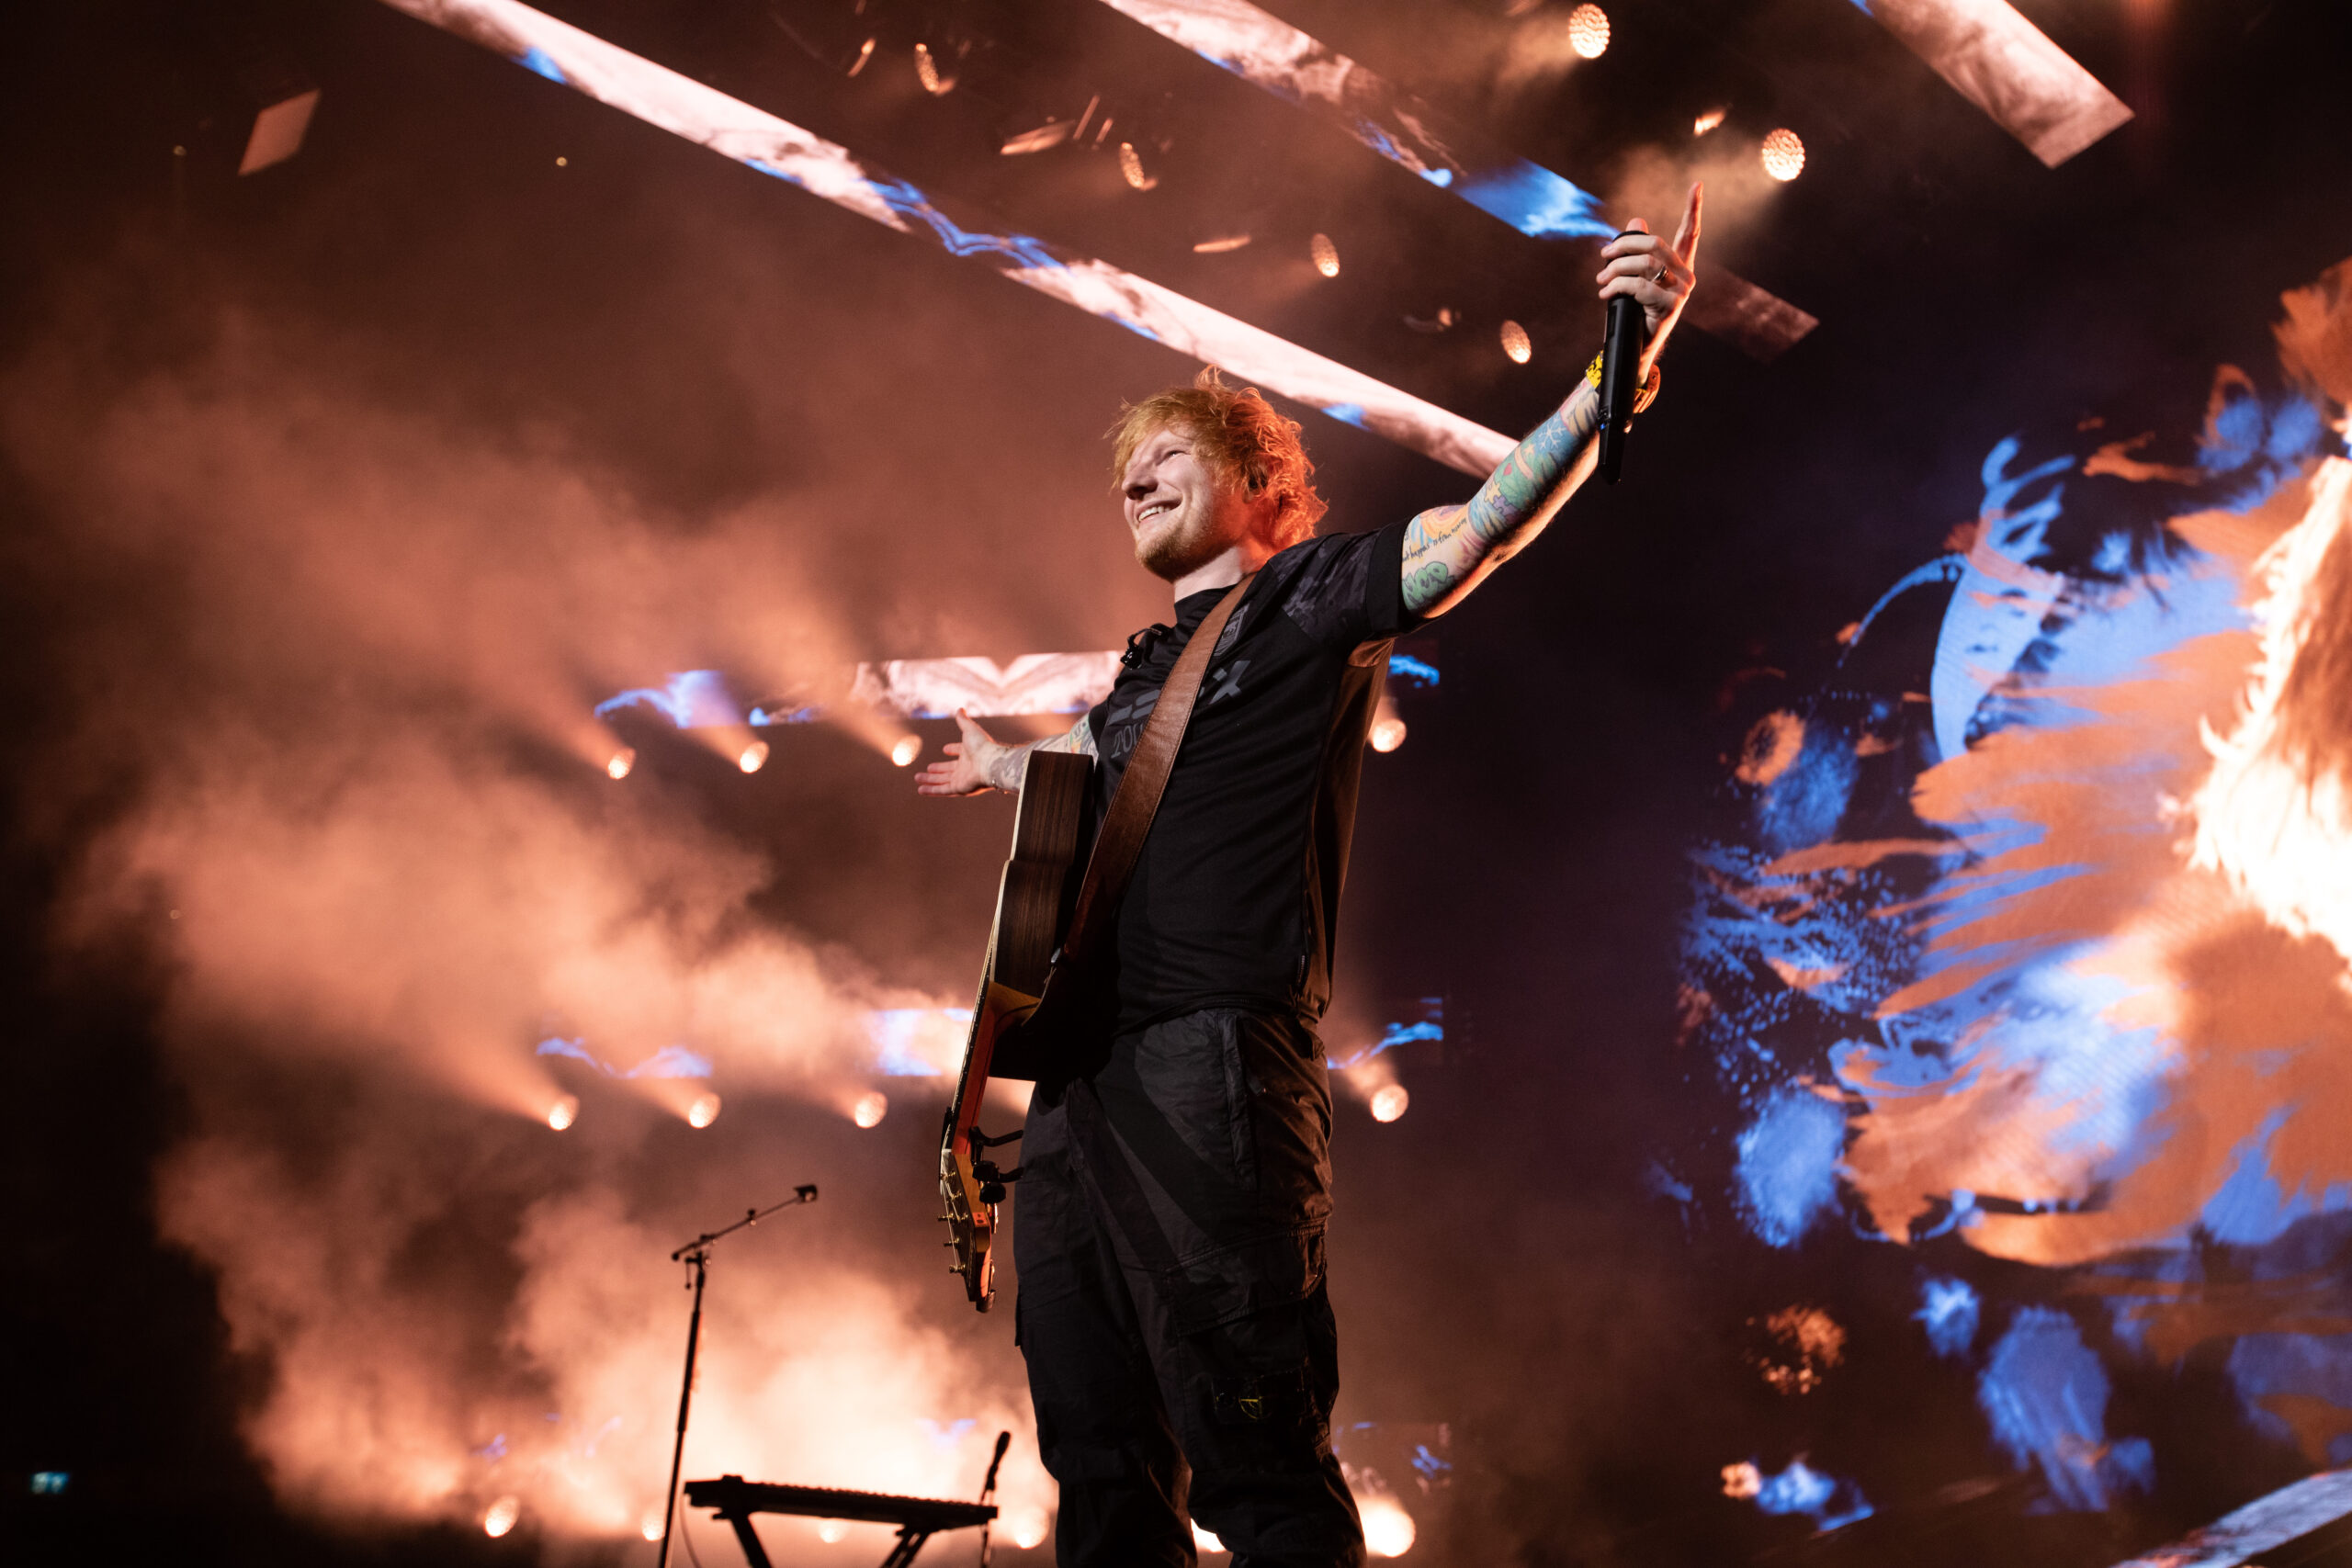 Ed Sheeran stood on stage with his arms outstretched and ticker tape flying around in the air